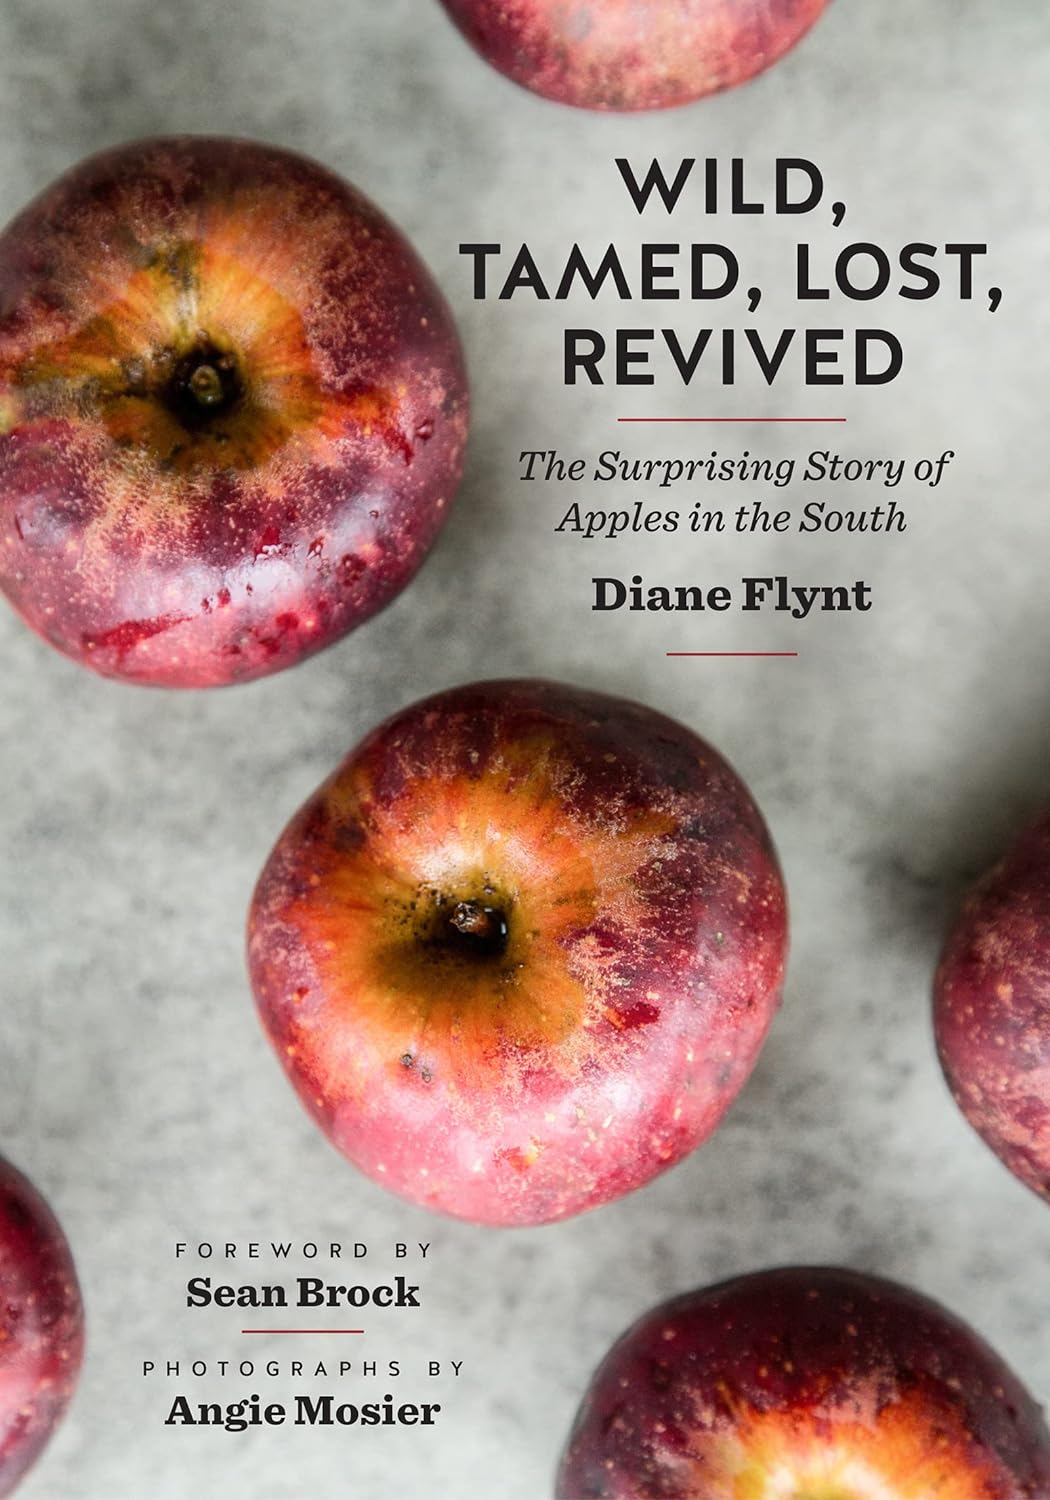 Wild, Tamed, Lost, Revived: The Surprising Story of Apples in the South (Diane Flynt)